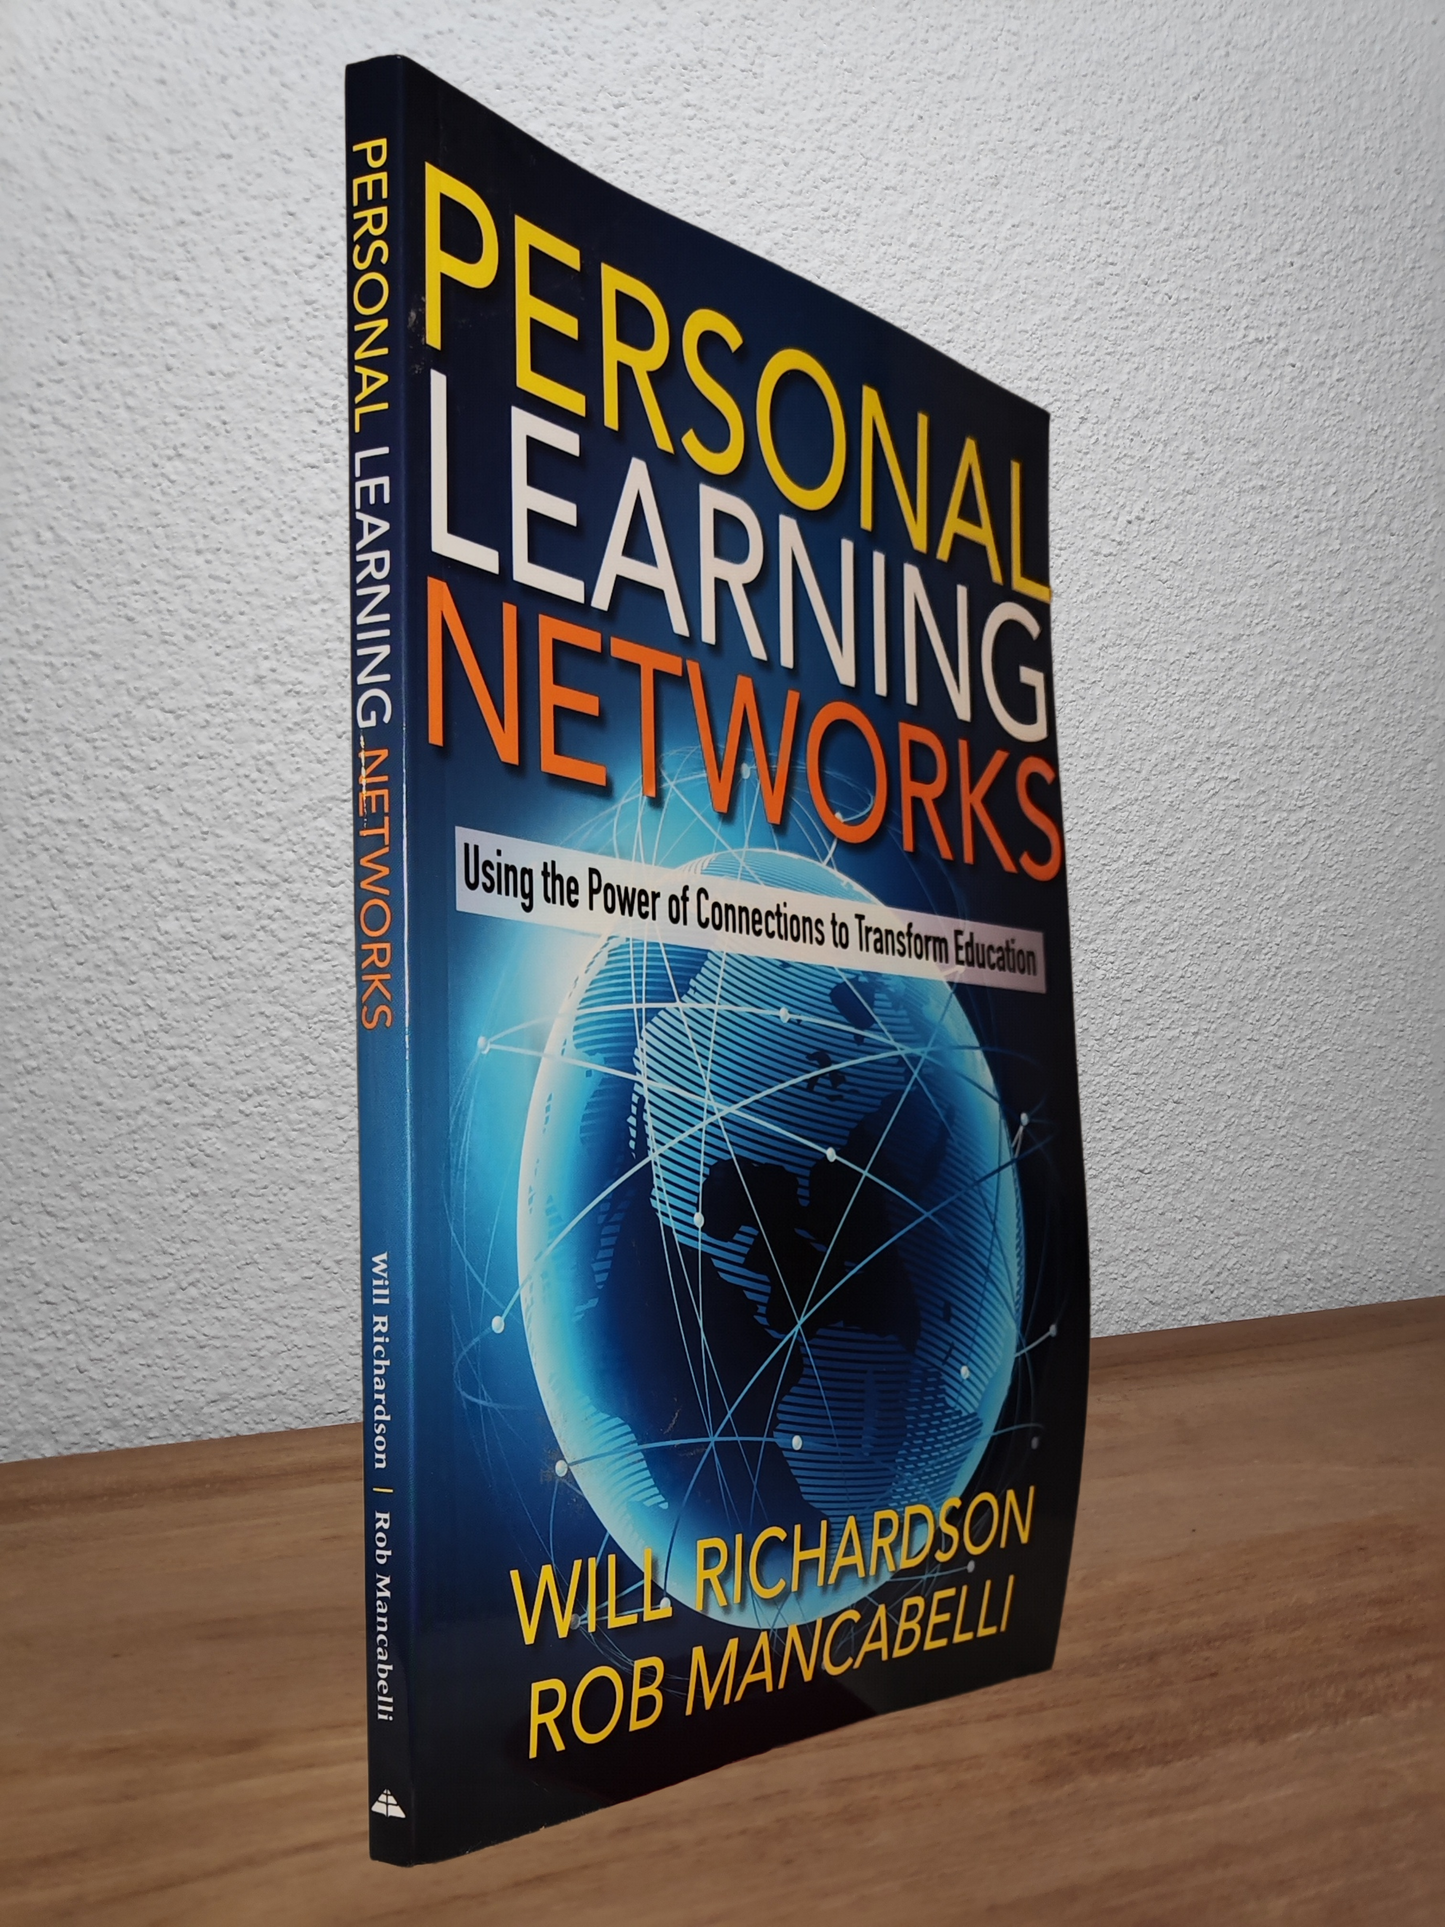 Will Richardson & Rob Mancabelli - Personal Learning Networks  - Second-hand english book to deliver in Zurich & Switzerland